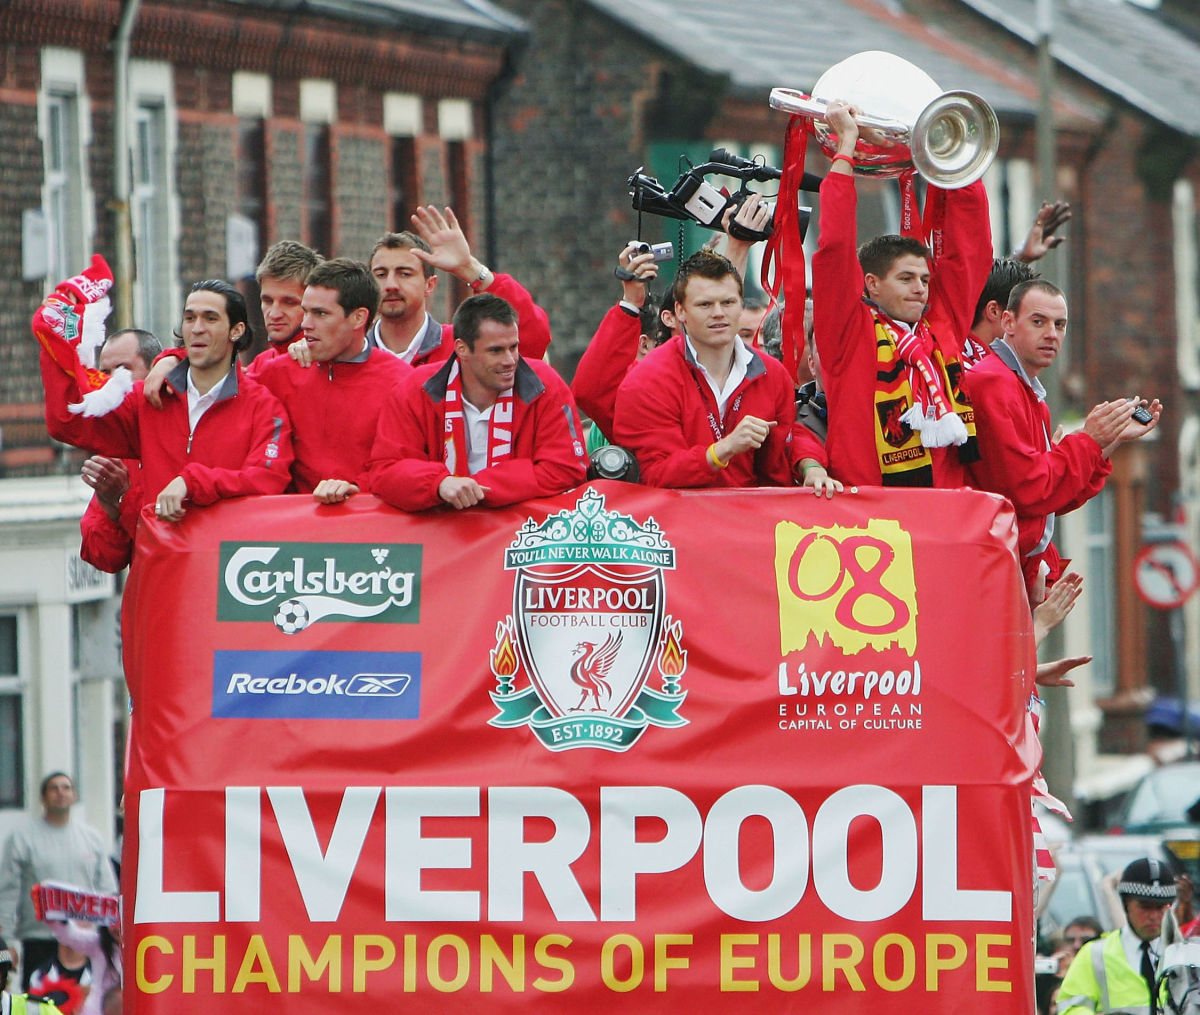 liverpool-celebrate-champions-league-win-with-victory-parade-5b0ffca5347a02c39b000001.jpg